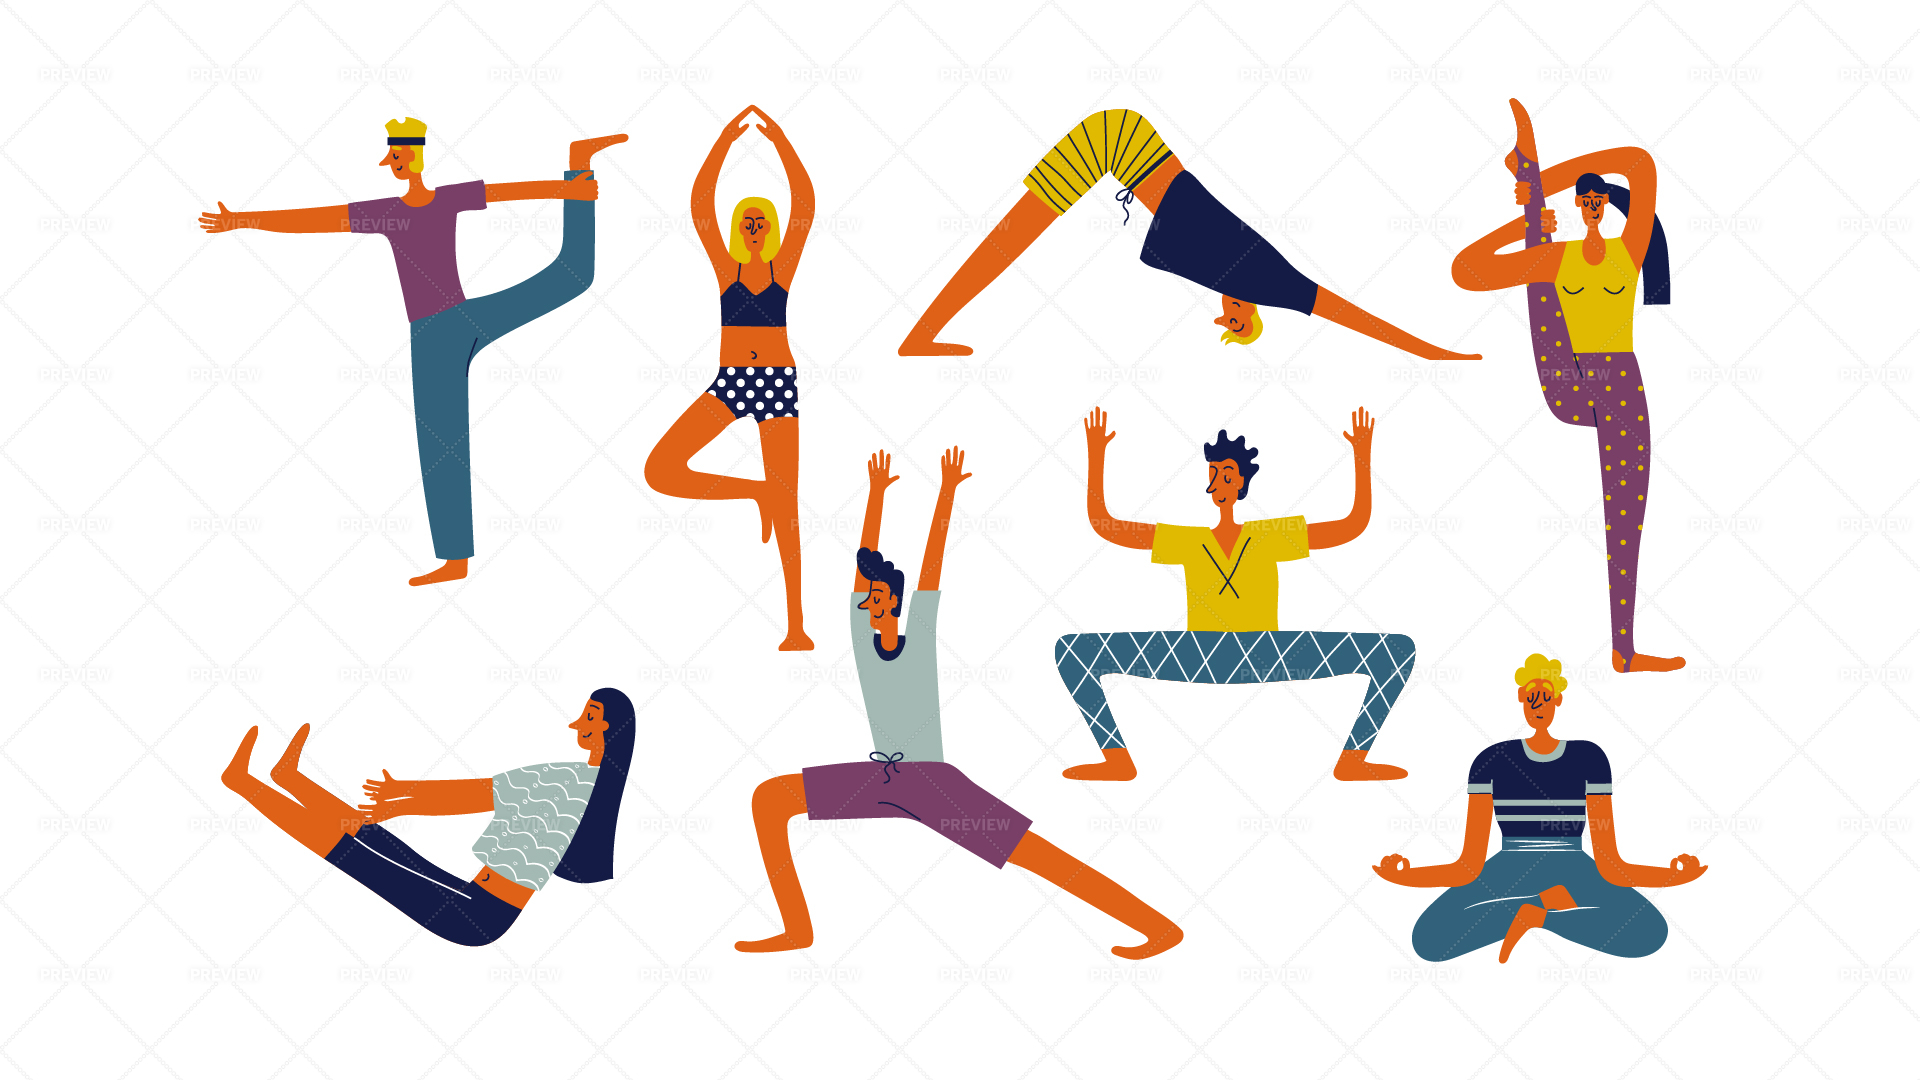 8 yoga poses for strong arms and core Royalty Free Vector